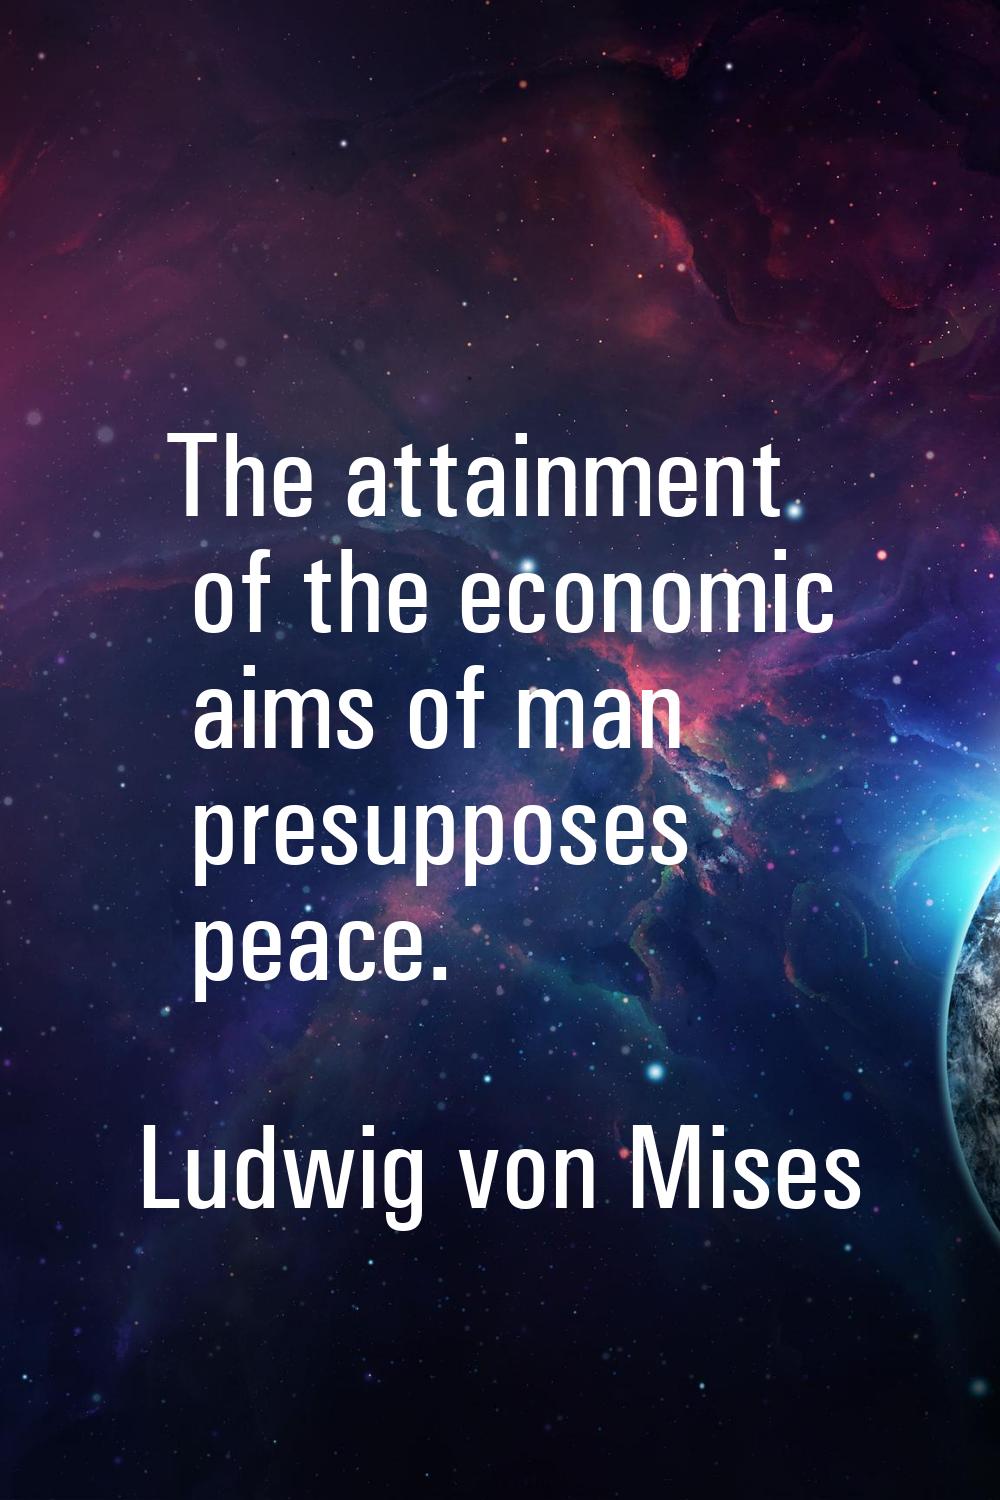 The attainment of the economic aims of man presupposes peace.